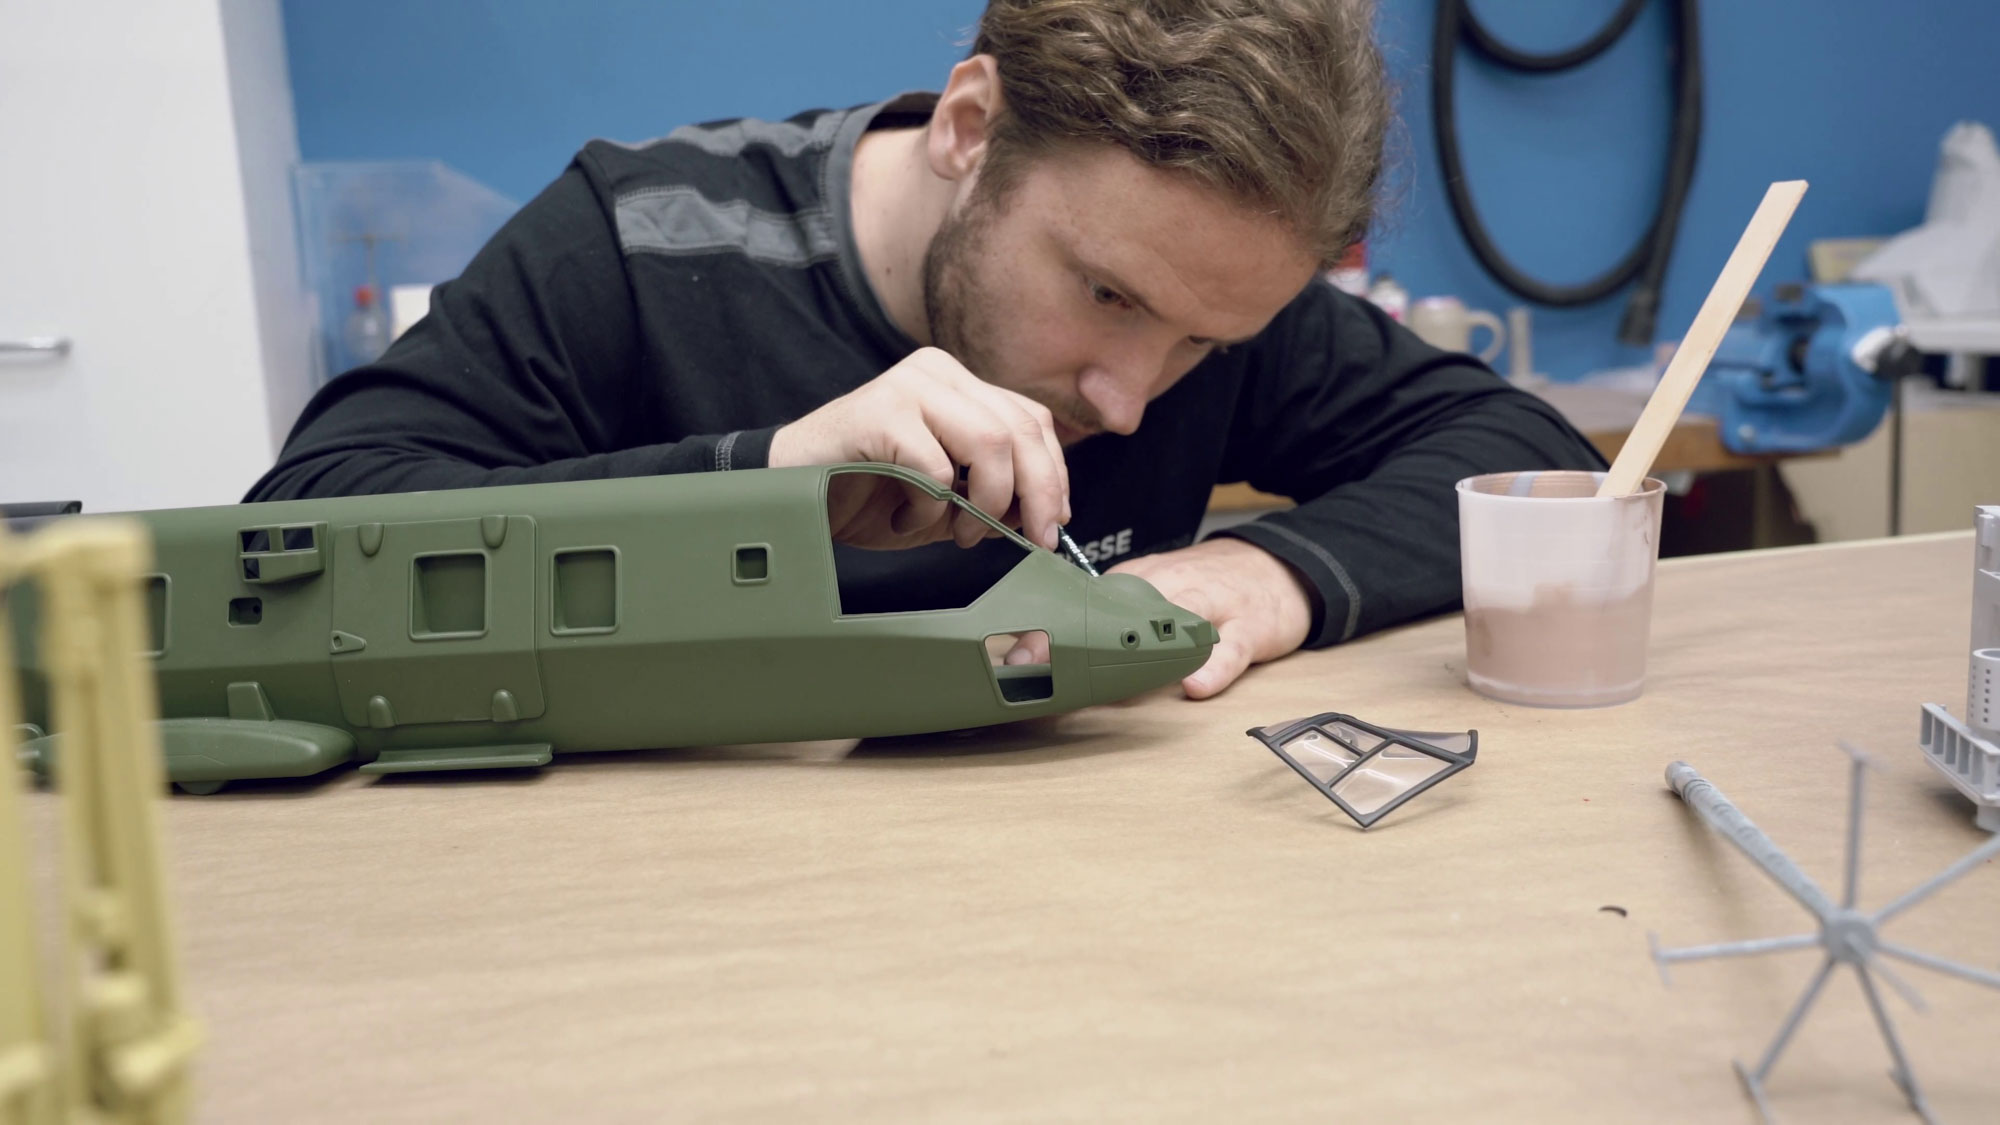 A person prototyping a model airplane at a workbench.